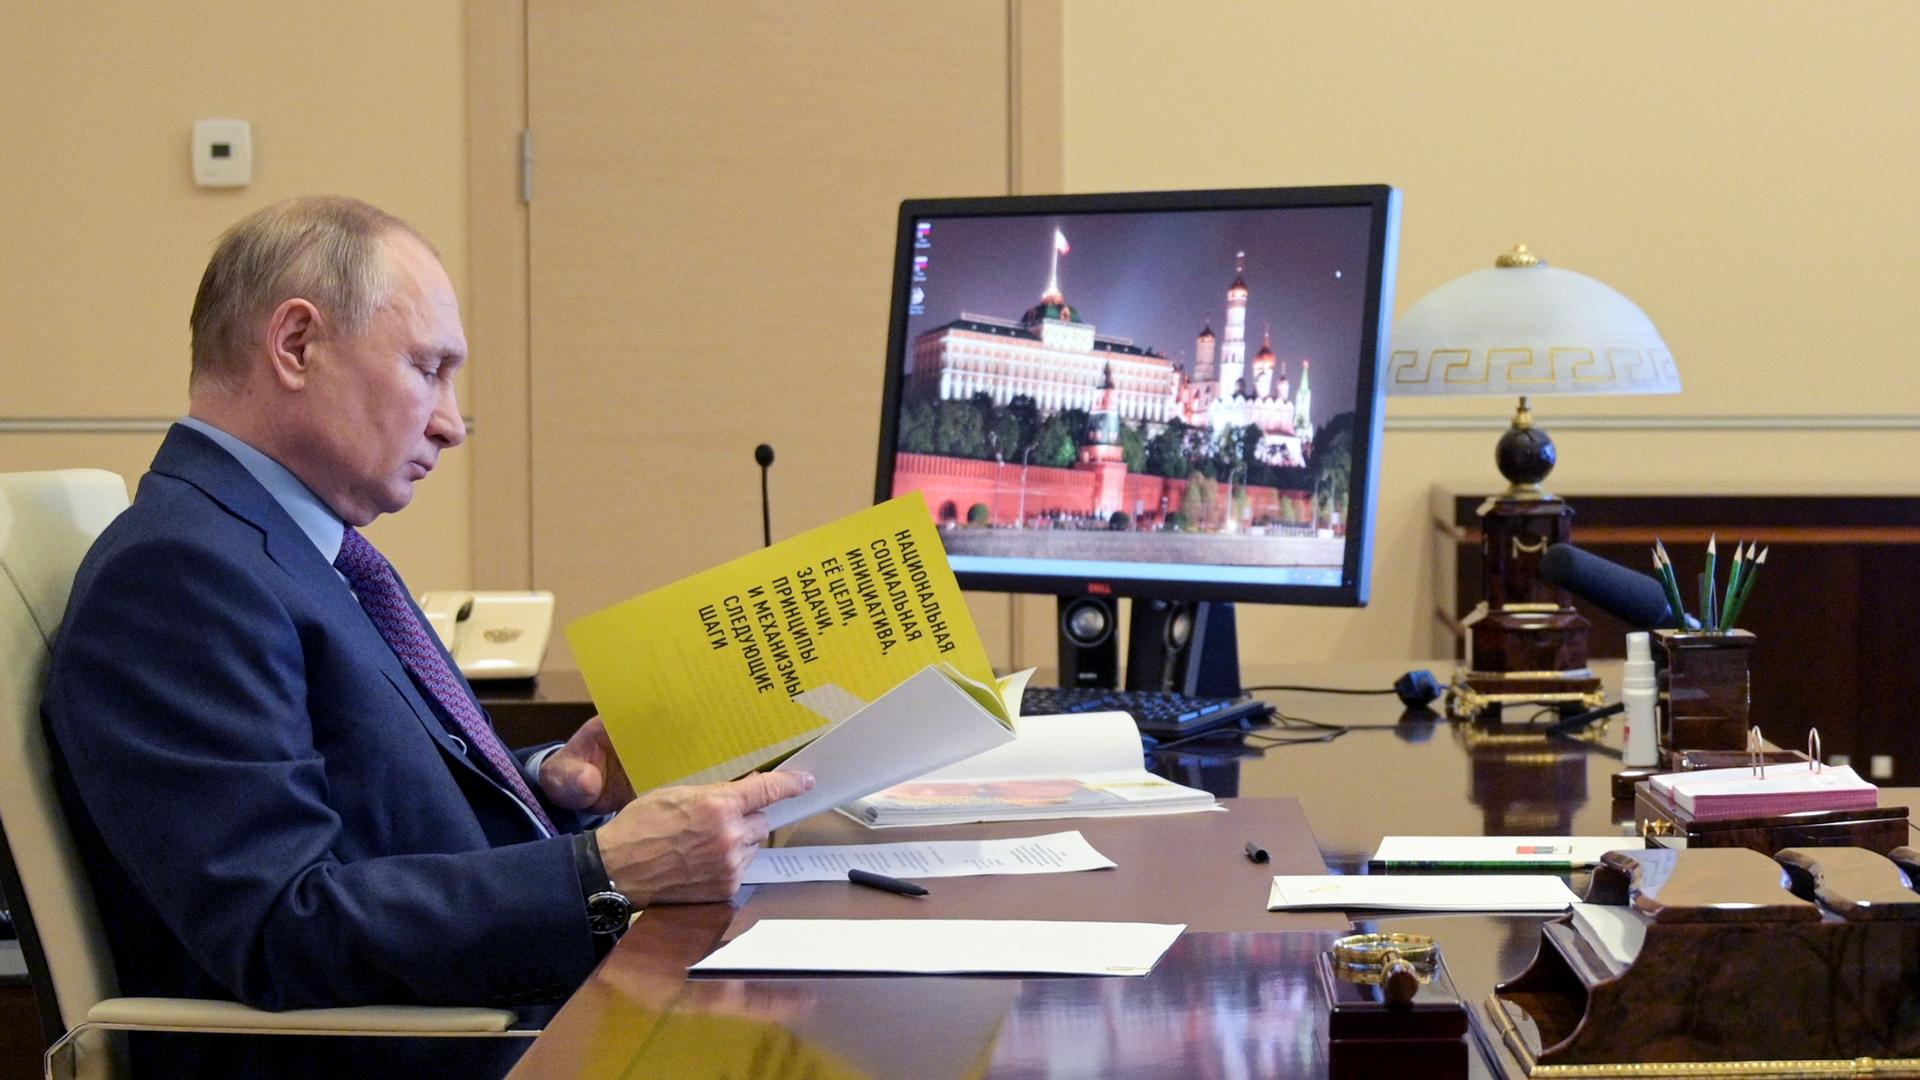 Russian President Vladimir Putin is shown sitting at a desk and looking down at a yellow document.